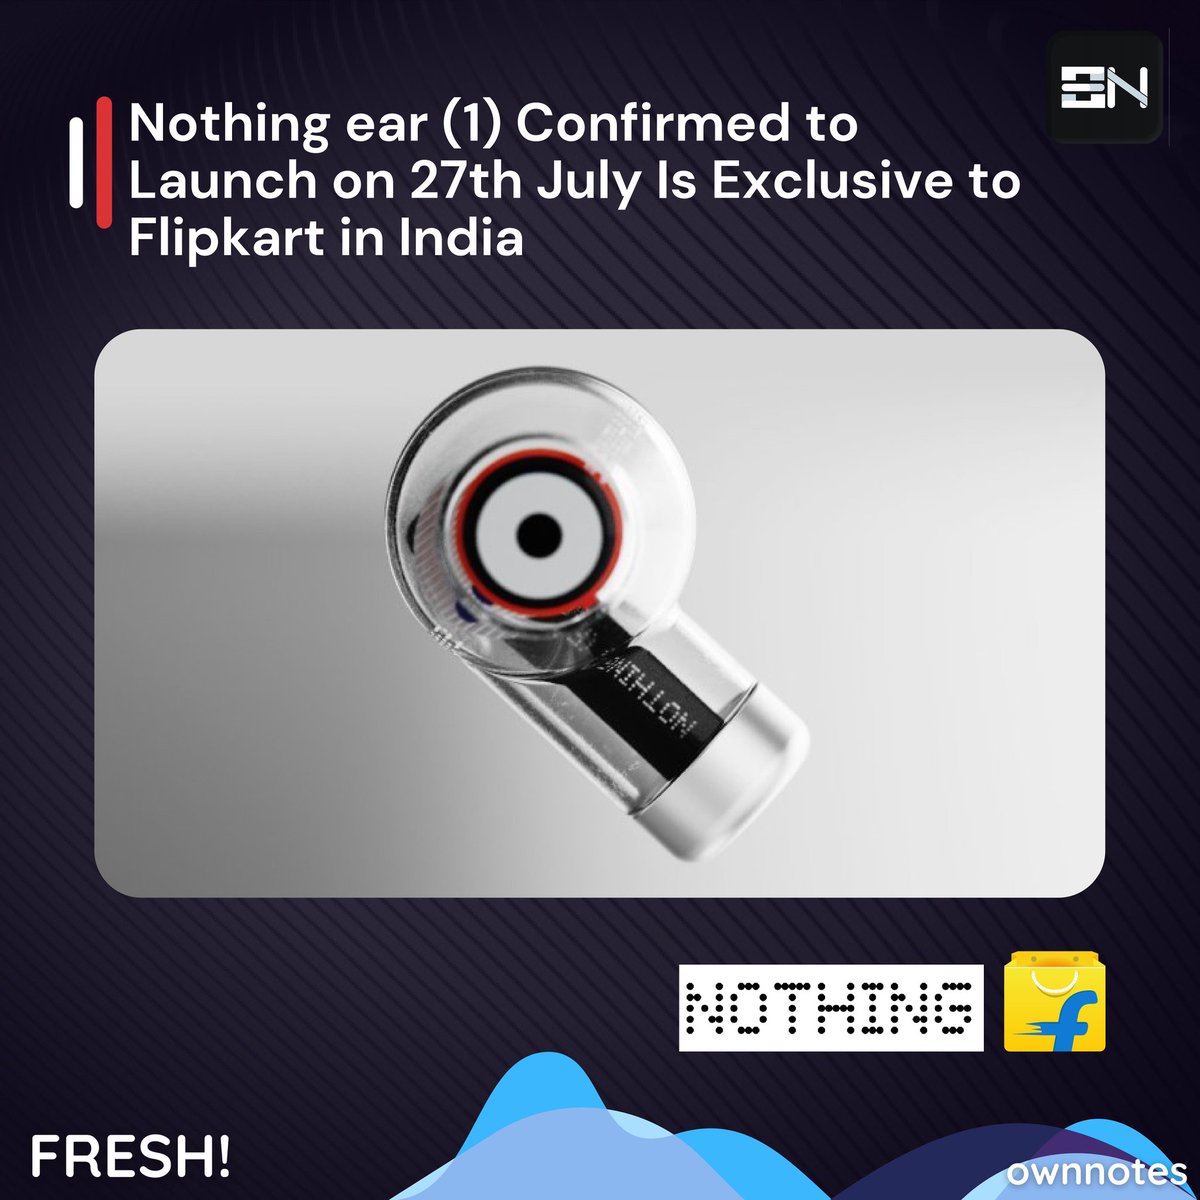 Nothing ear (1) Confirmed to 
Launch on 27th July Is Exclusive to Flipkart in India

#flipkart #nothinglikeus
#flipkartbuyers
#flipkartfashion #flipkartshopping #earbuds #tws #nothing #nothingtws #announcement #official #realmetws #redmitws #boattws #boattwsearbuds